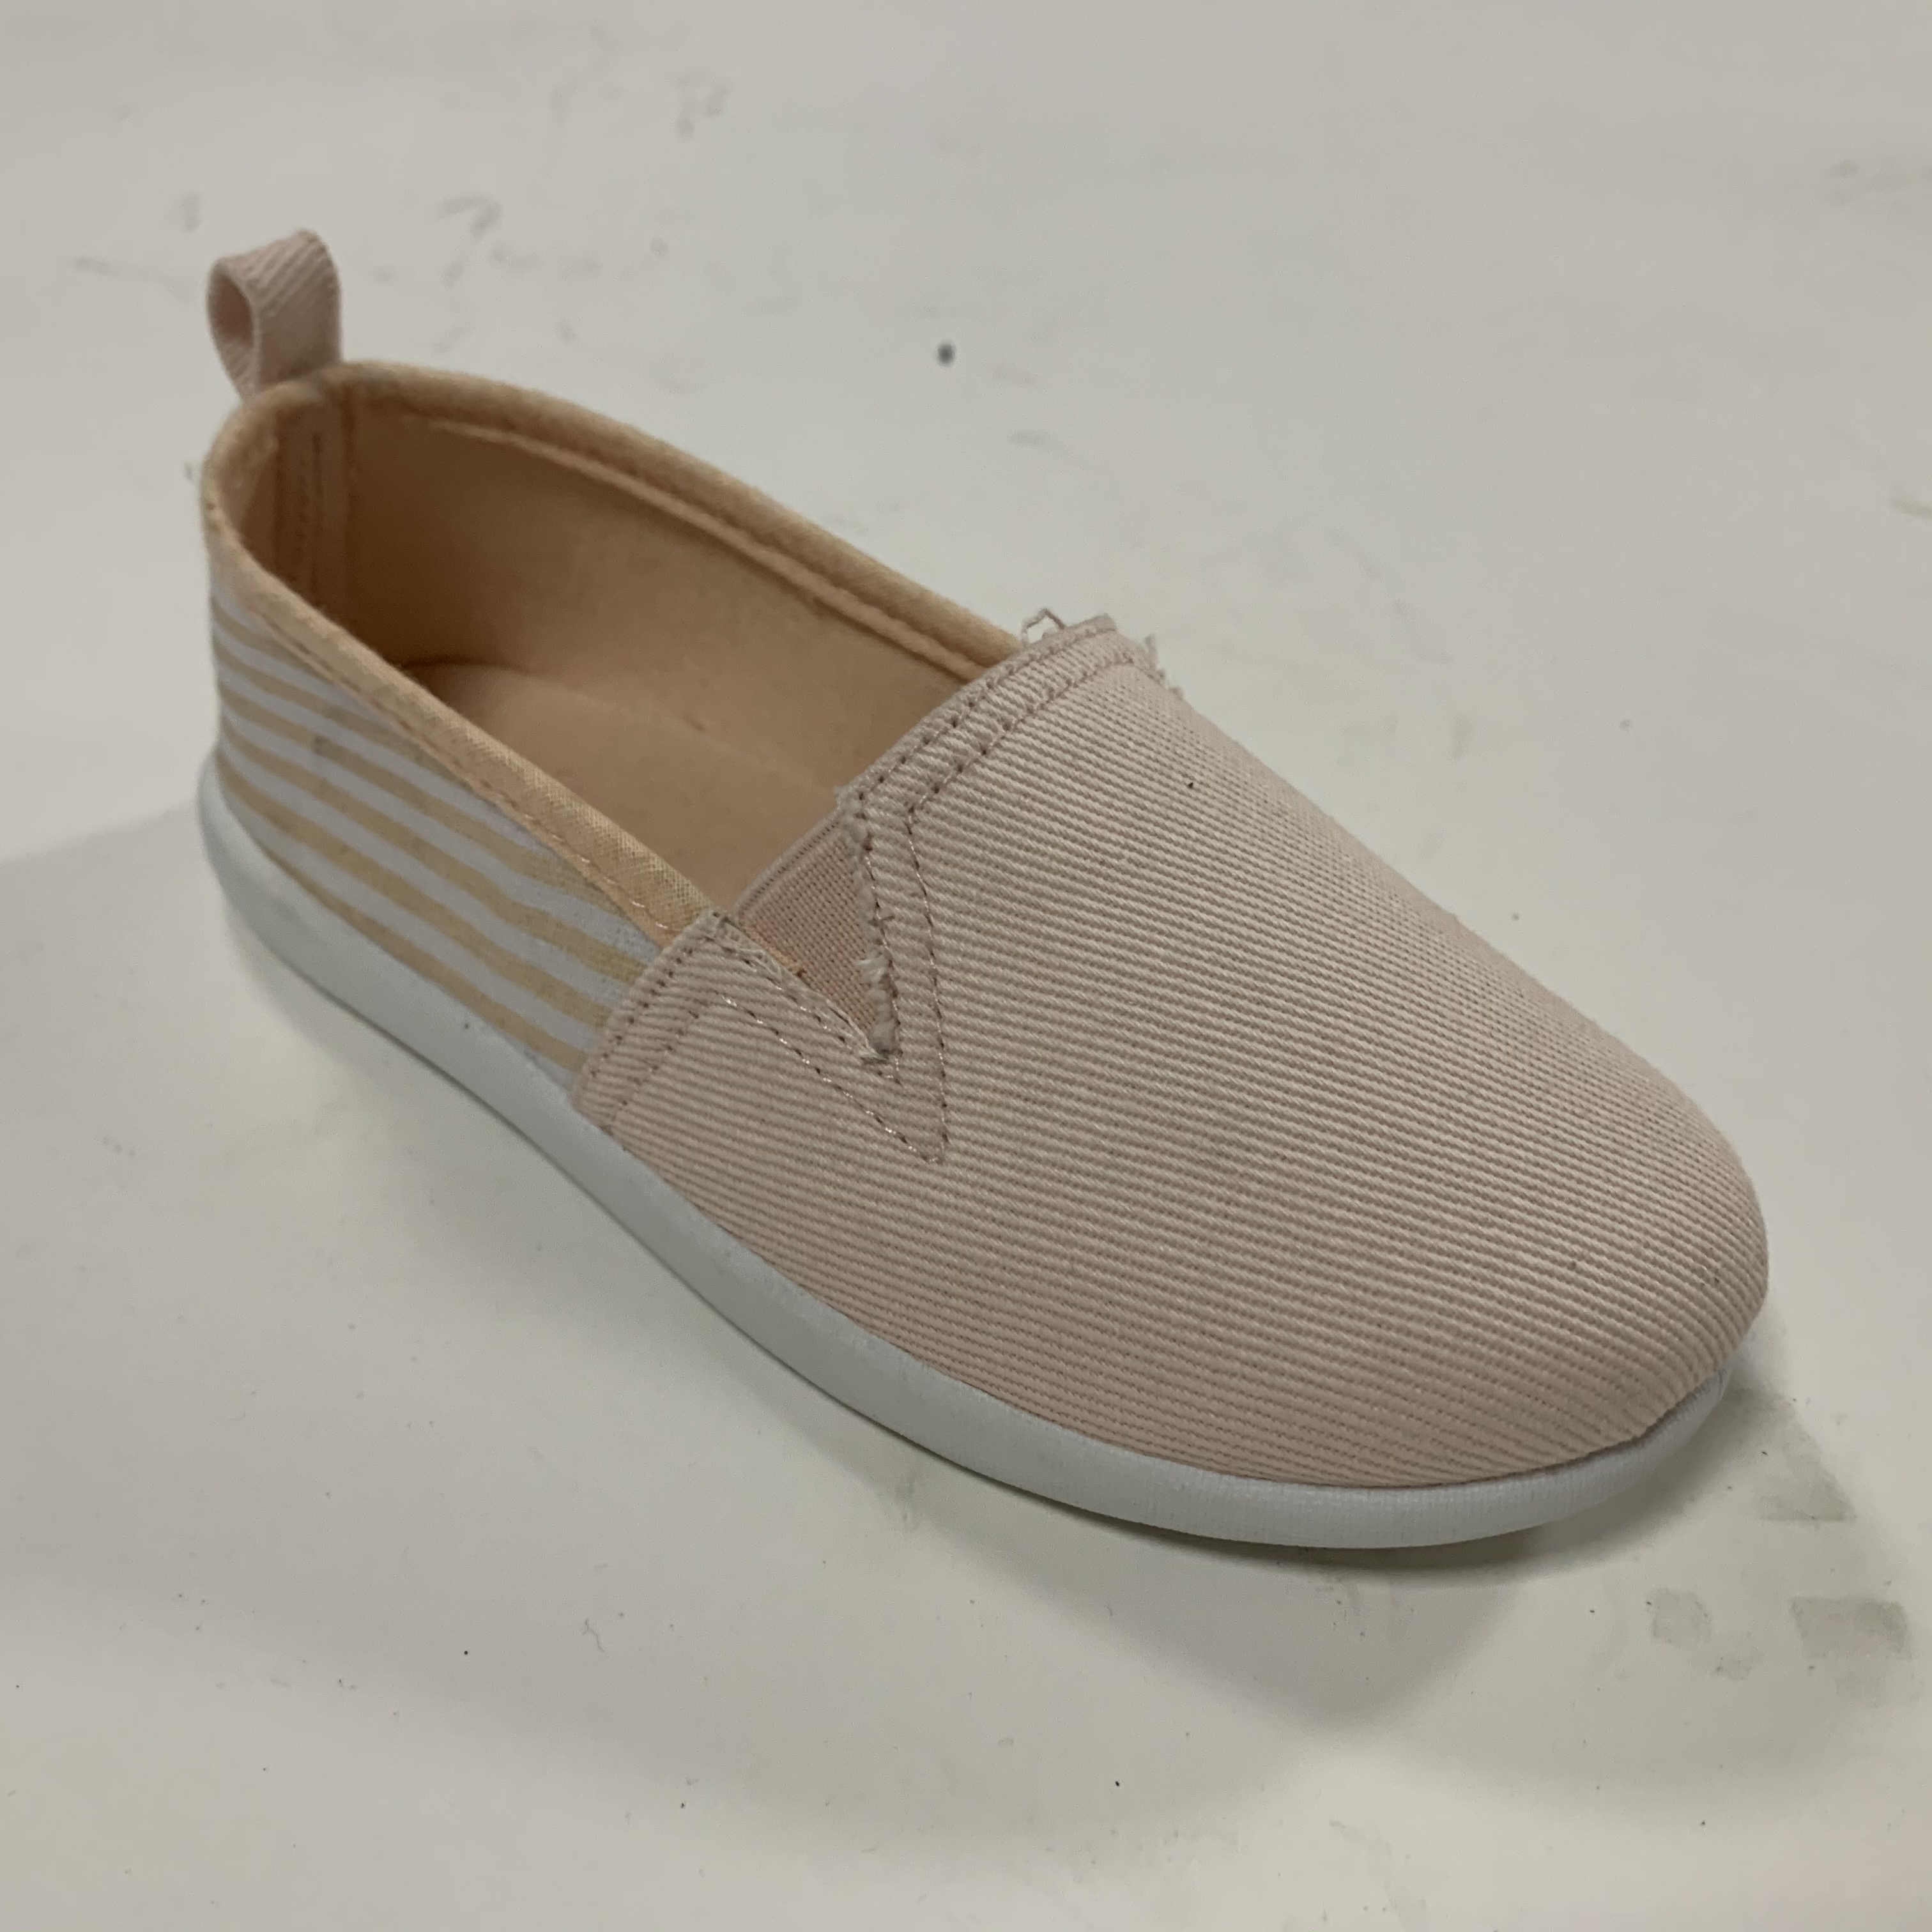 Kids' Casual Shoes Slip On Shoes